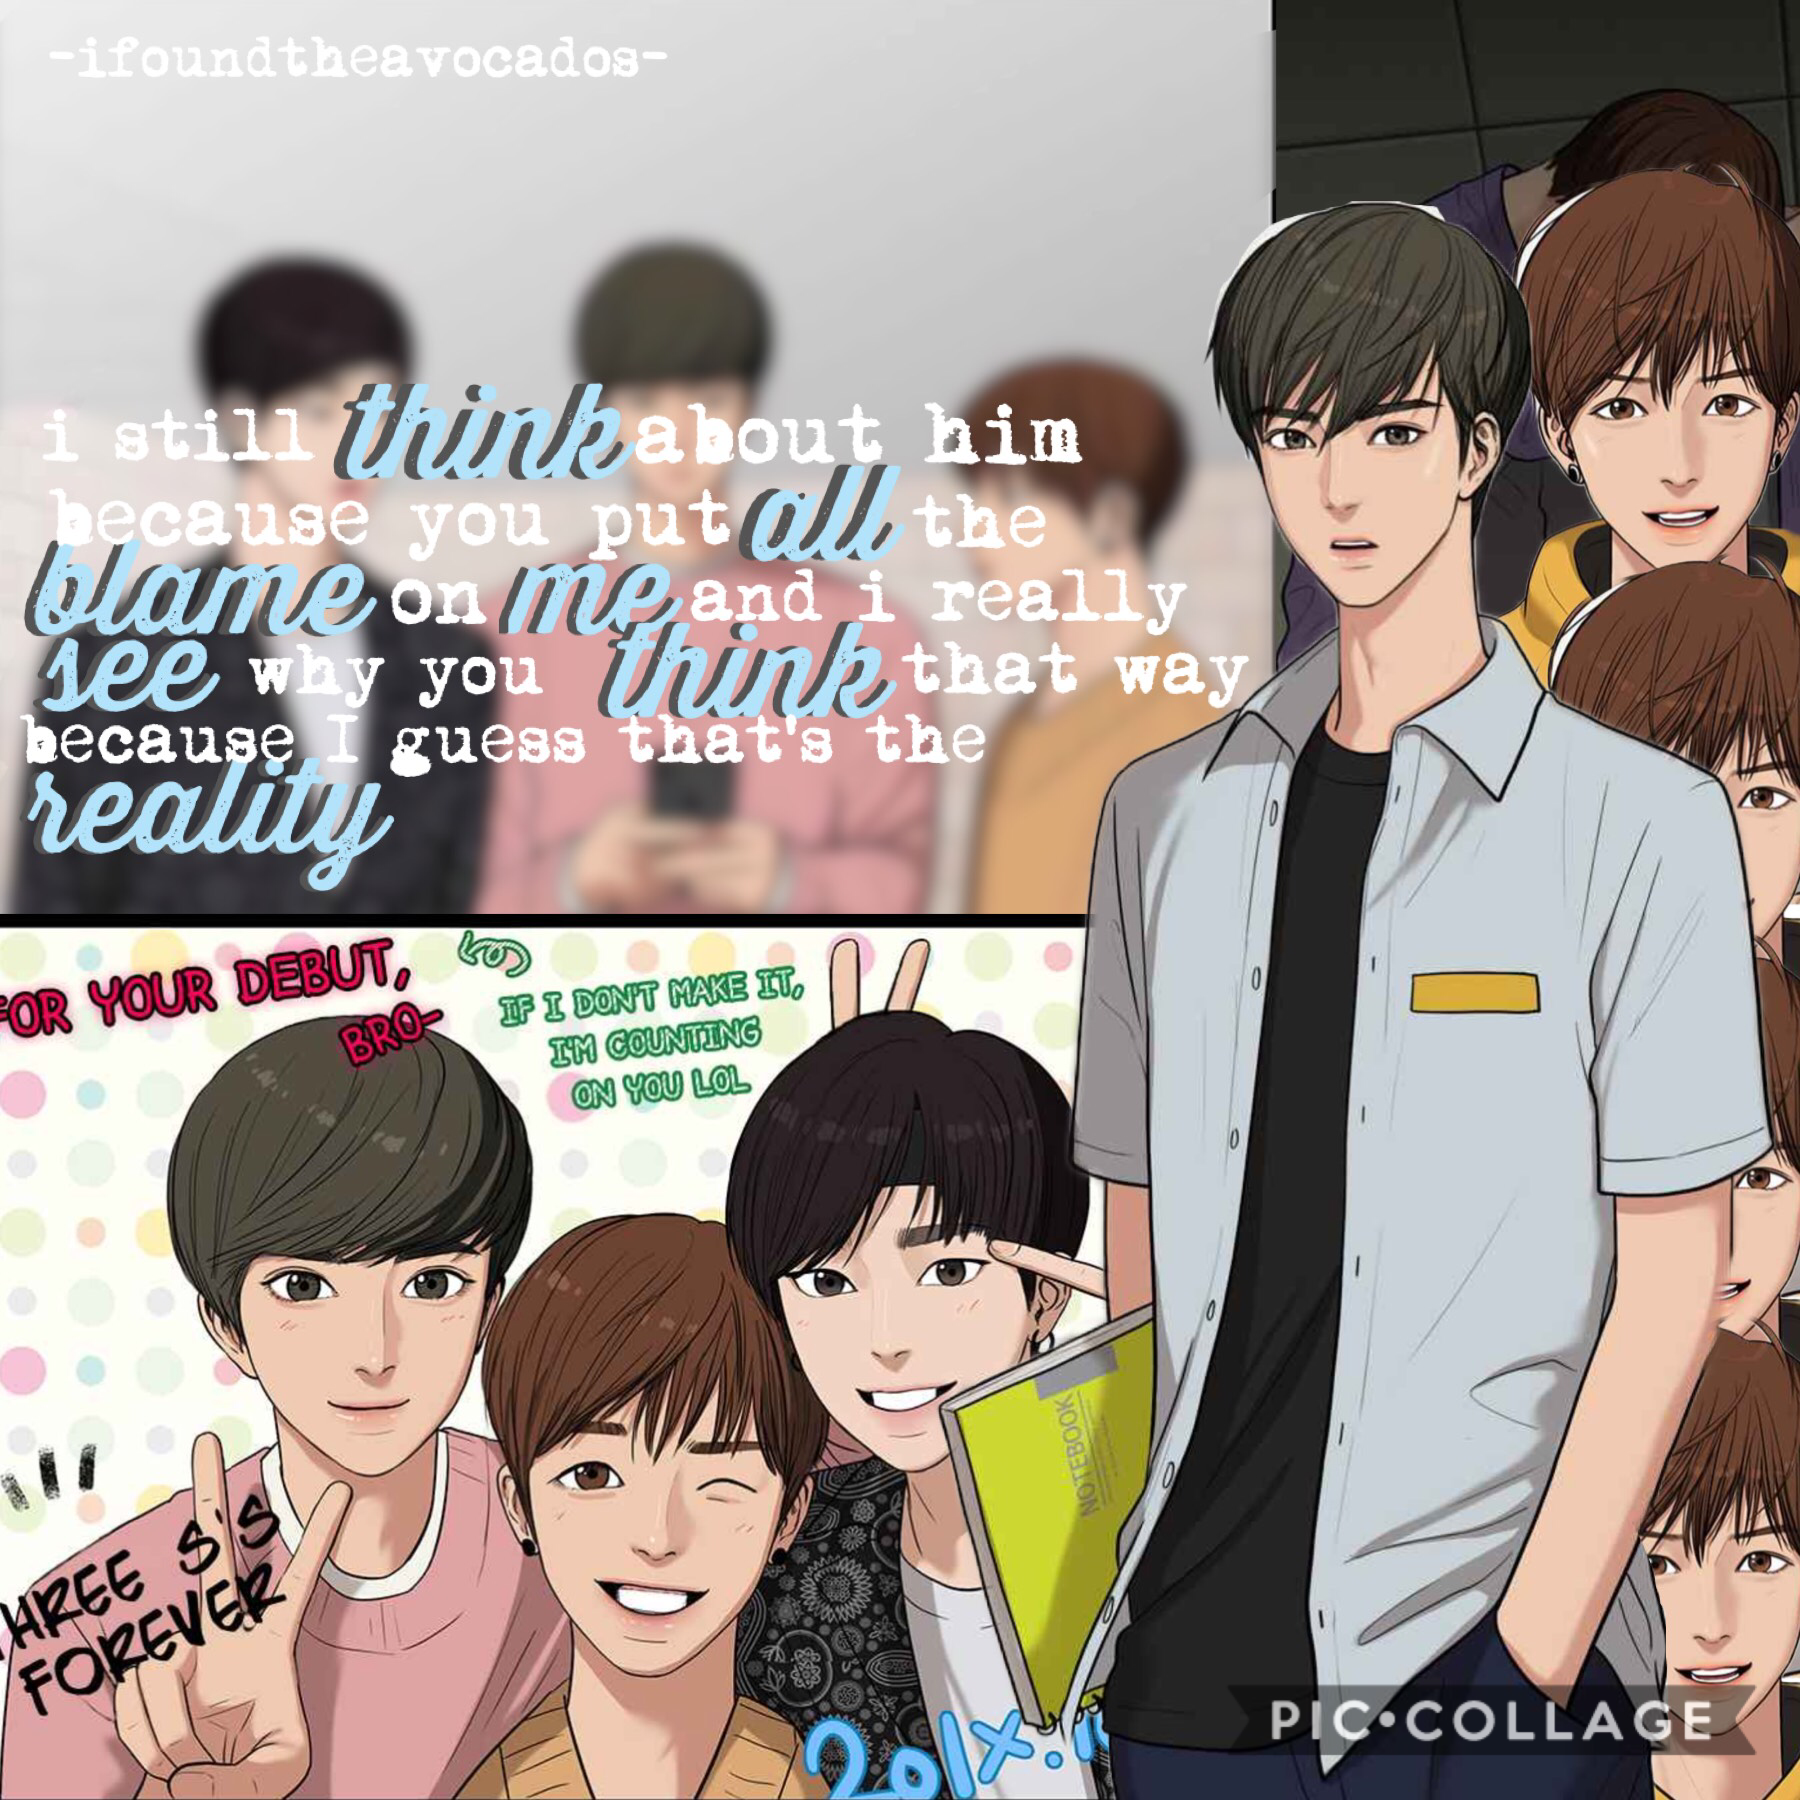 ARGHHH NOOOOO IT WASN’T SUHO’S FAULT SEYEON- (no spoilers 😂 tappy)
True Beauty lovers READ THE TEXT omg Suho is soooo underrated LOOK IN REMIXES FOR MY REASONS 😂😝🤘also if u haven’t heard of true beauty DOWNLOAD WEBTOON AND SEARCH UP TRUE BEAUTY YOU WONT R